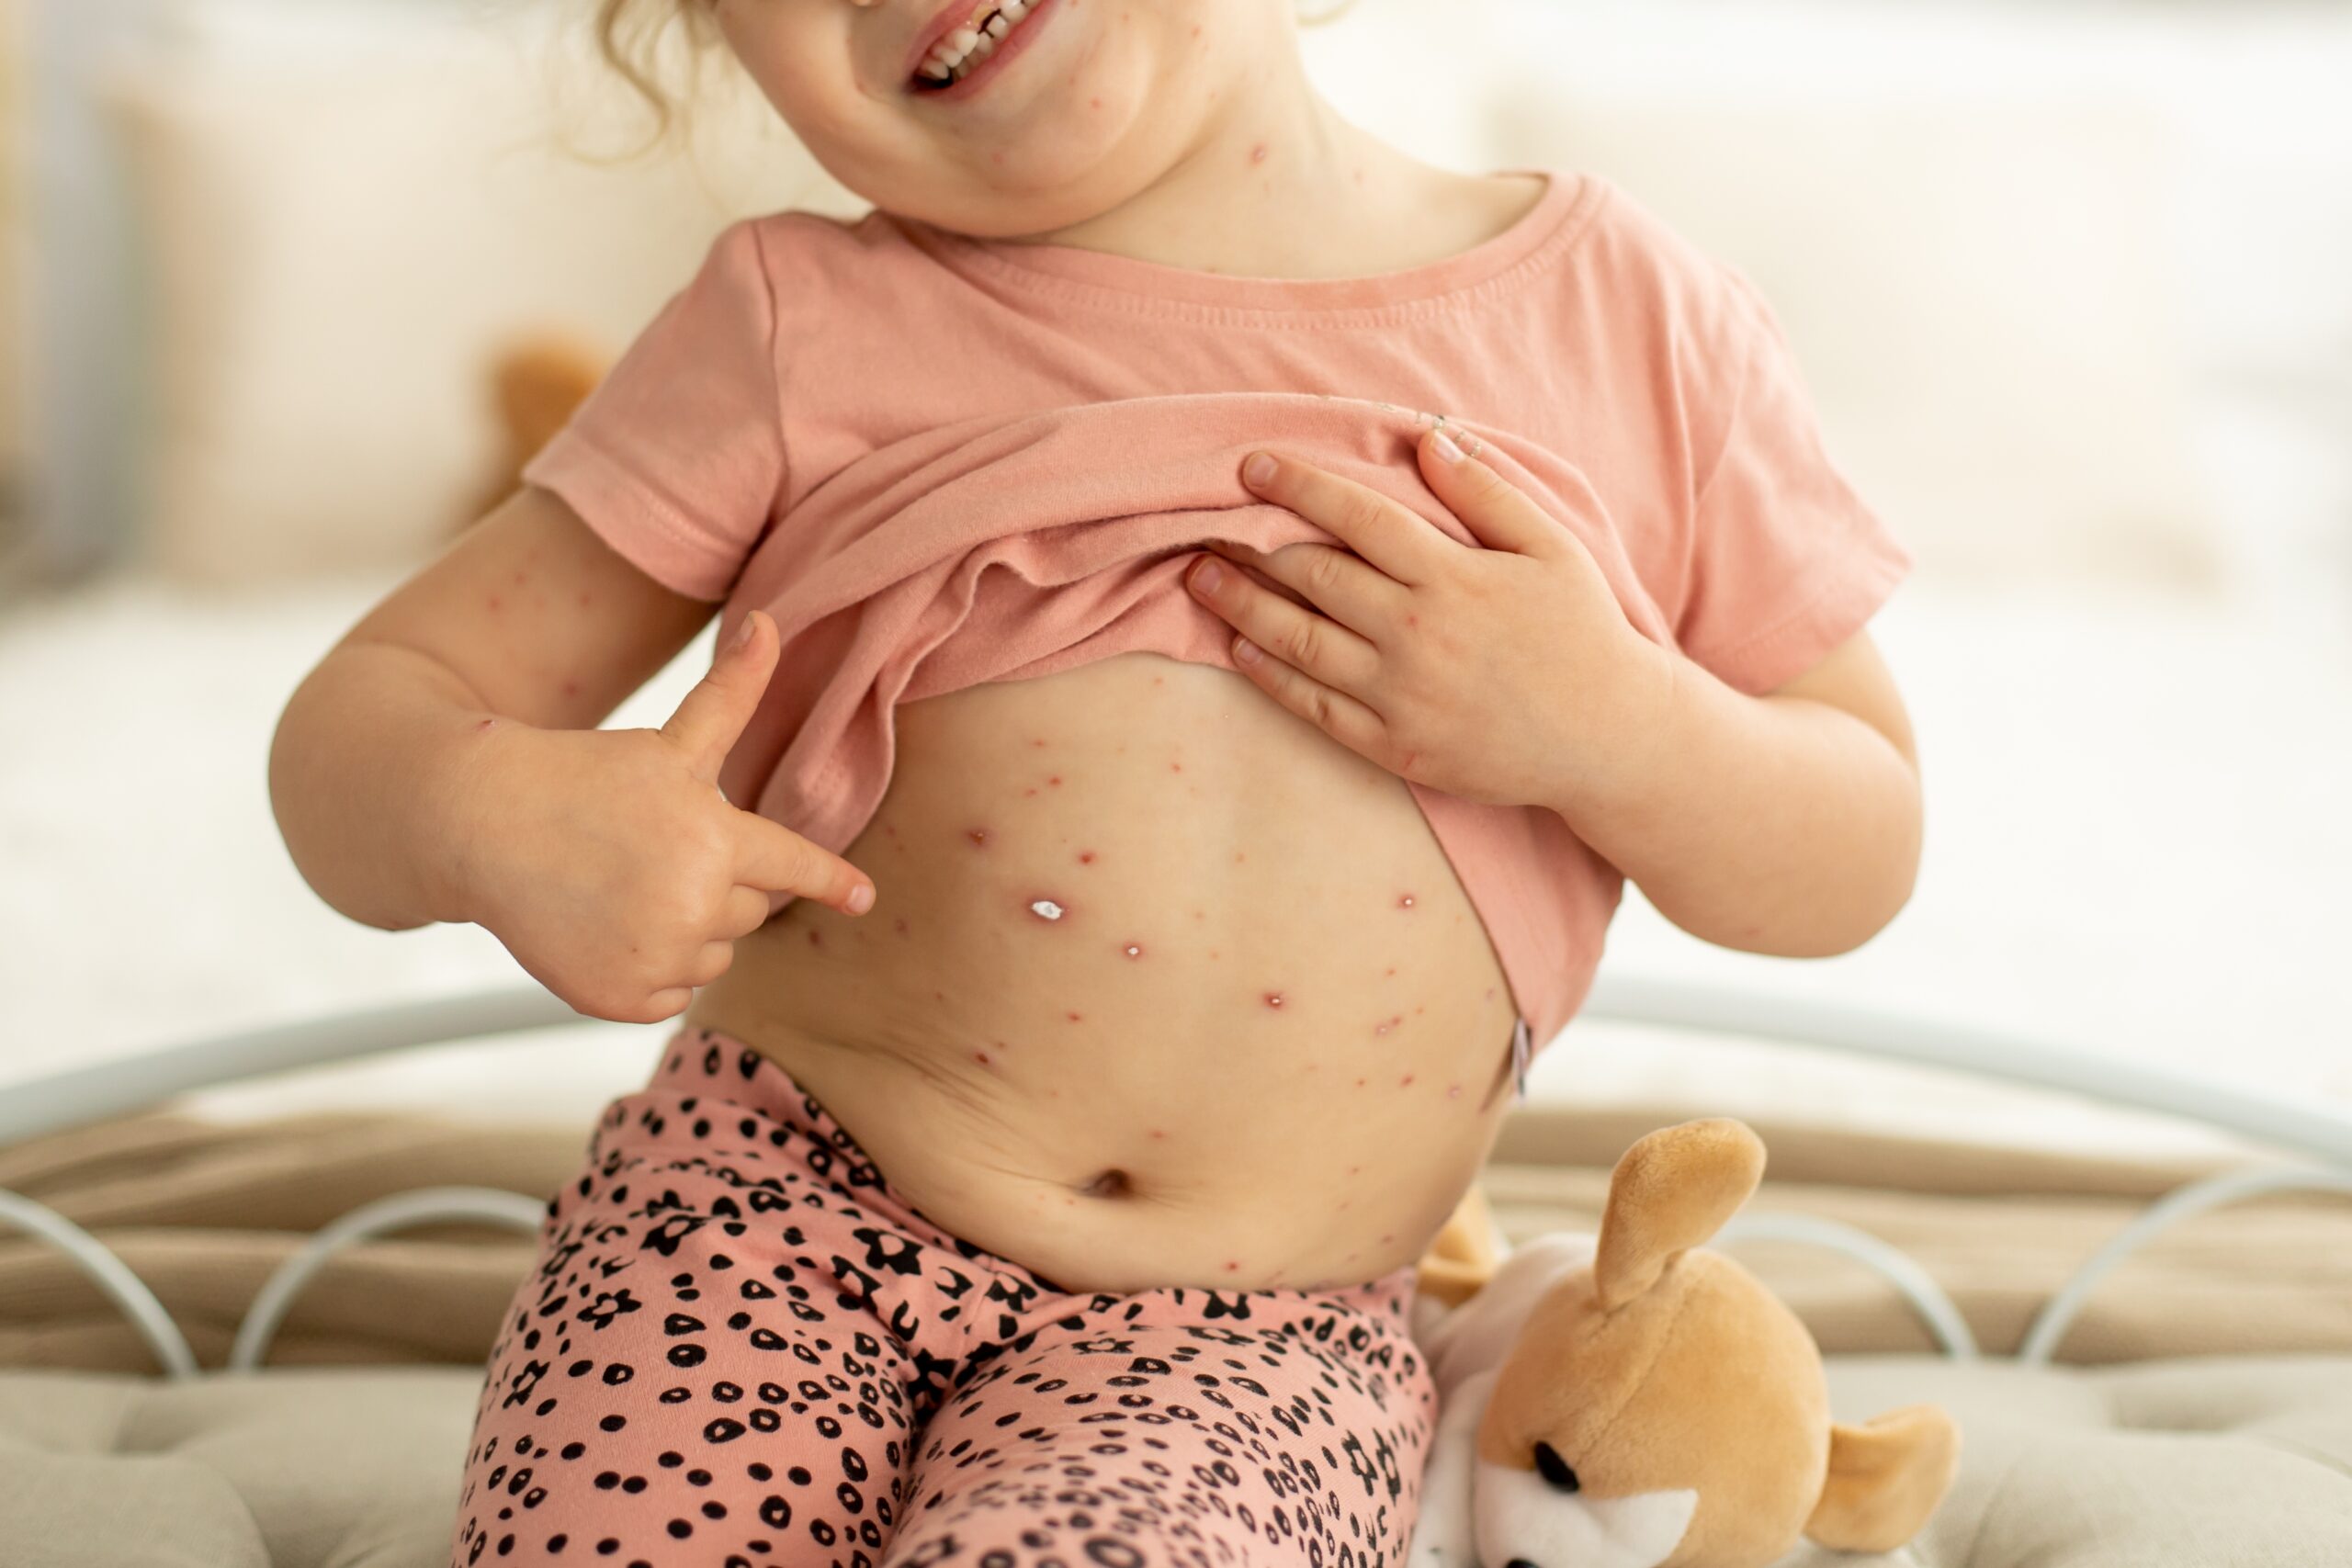 Chickenpox: Causes, Symptoms, and Treatment